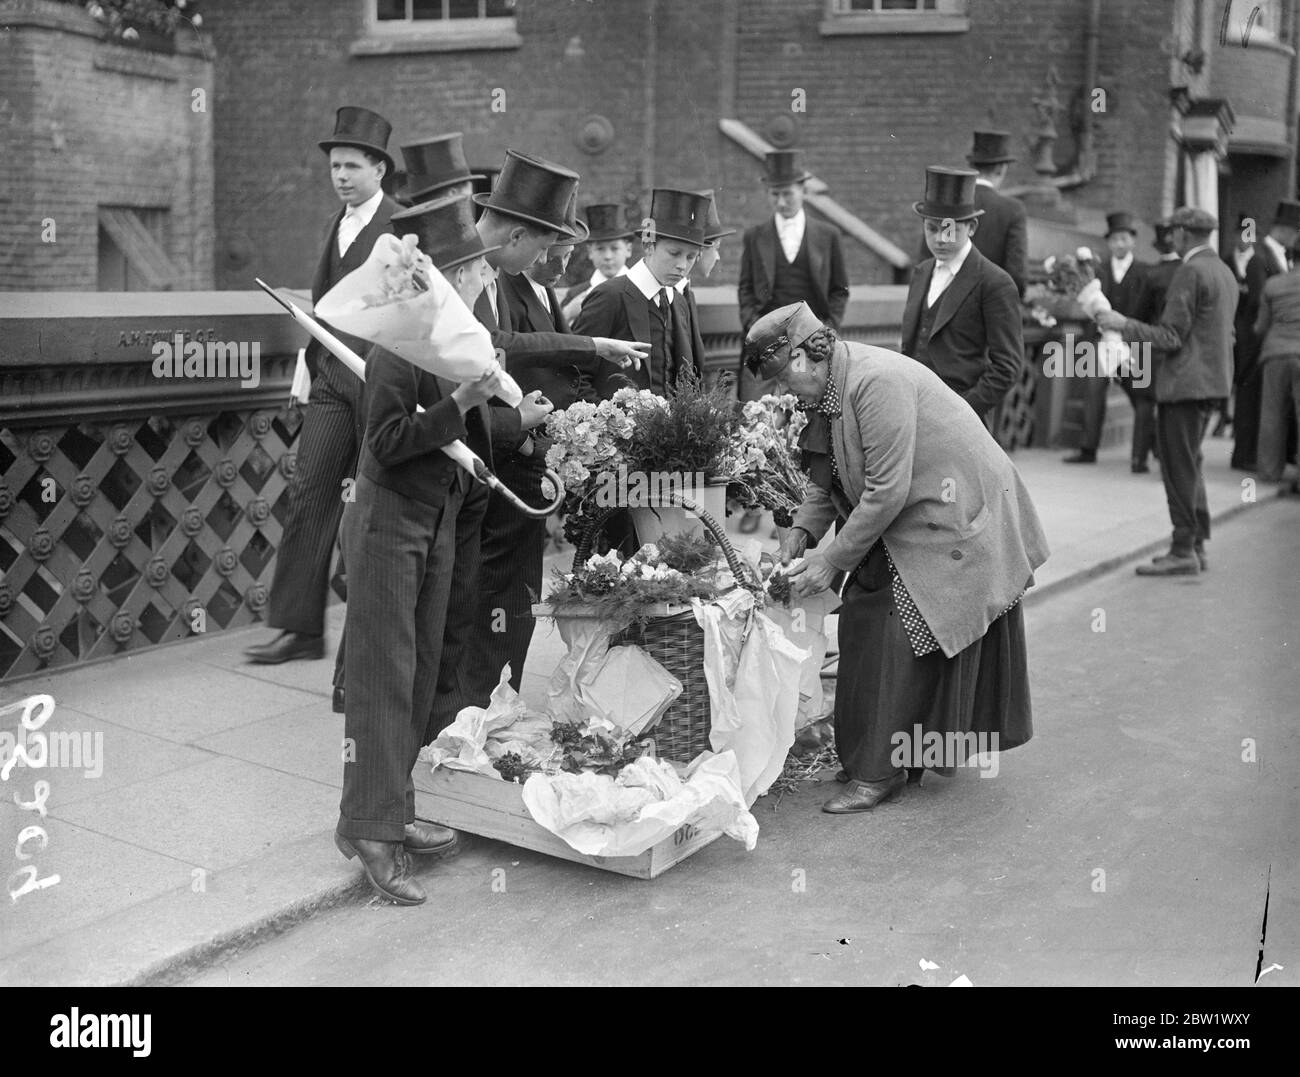 Eton boys buy fourth of June flowers. With a full programme of events, Eton College celebrated 4 June. The Coronation 'Fourth' was expected to be the most brilliant of any post-war year. Photo shows, Eton boys selecting their fourth of June flowers . 4 June 1937 Stock Photo